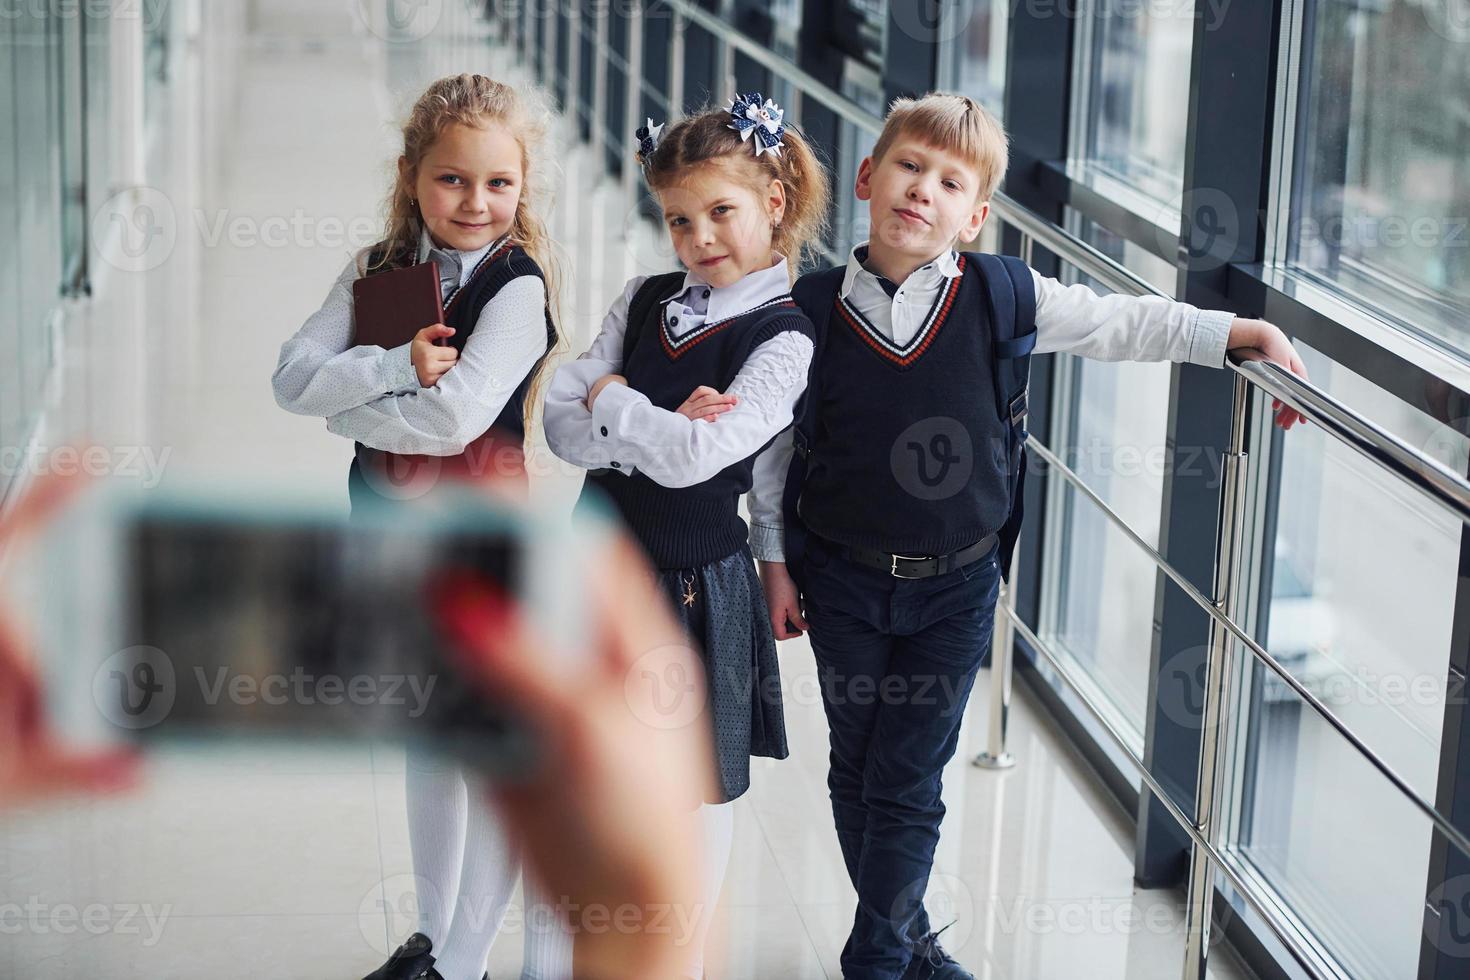 School kids in uniform making a photo together in corridor. Conception of education